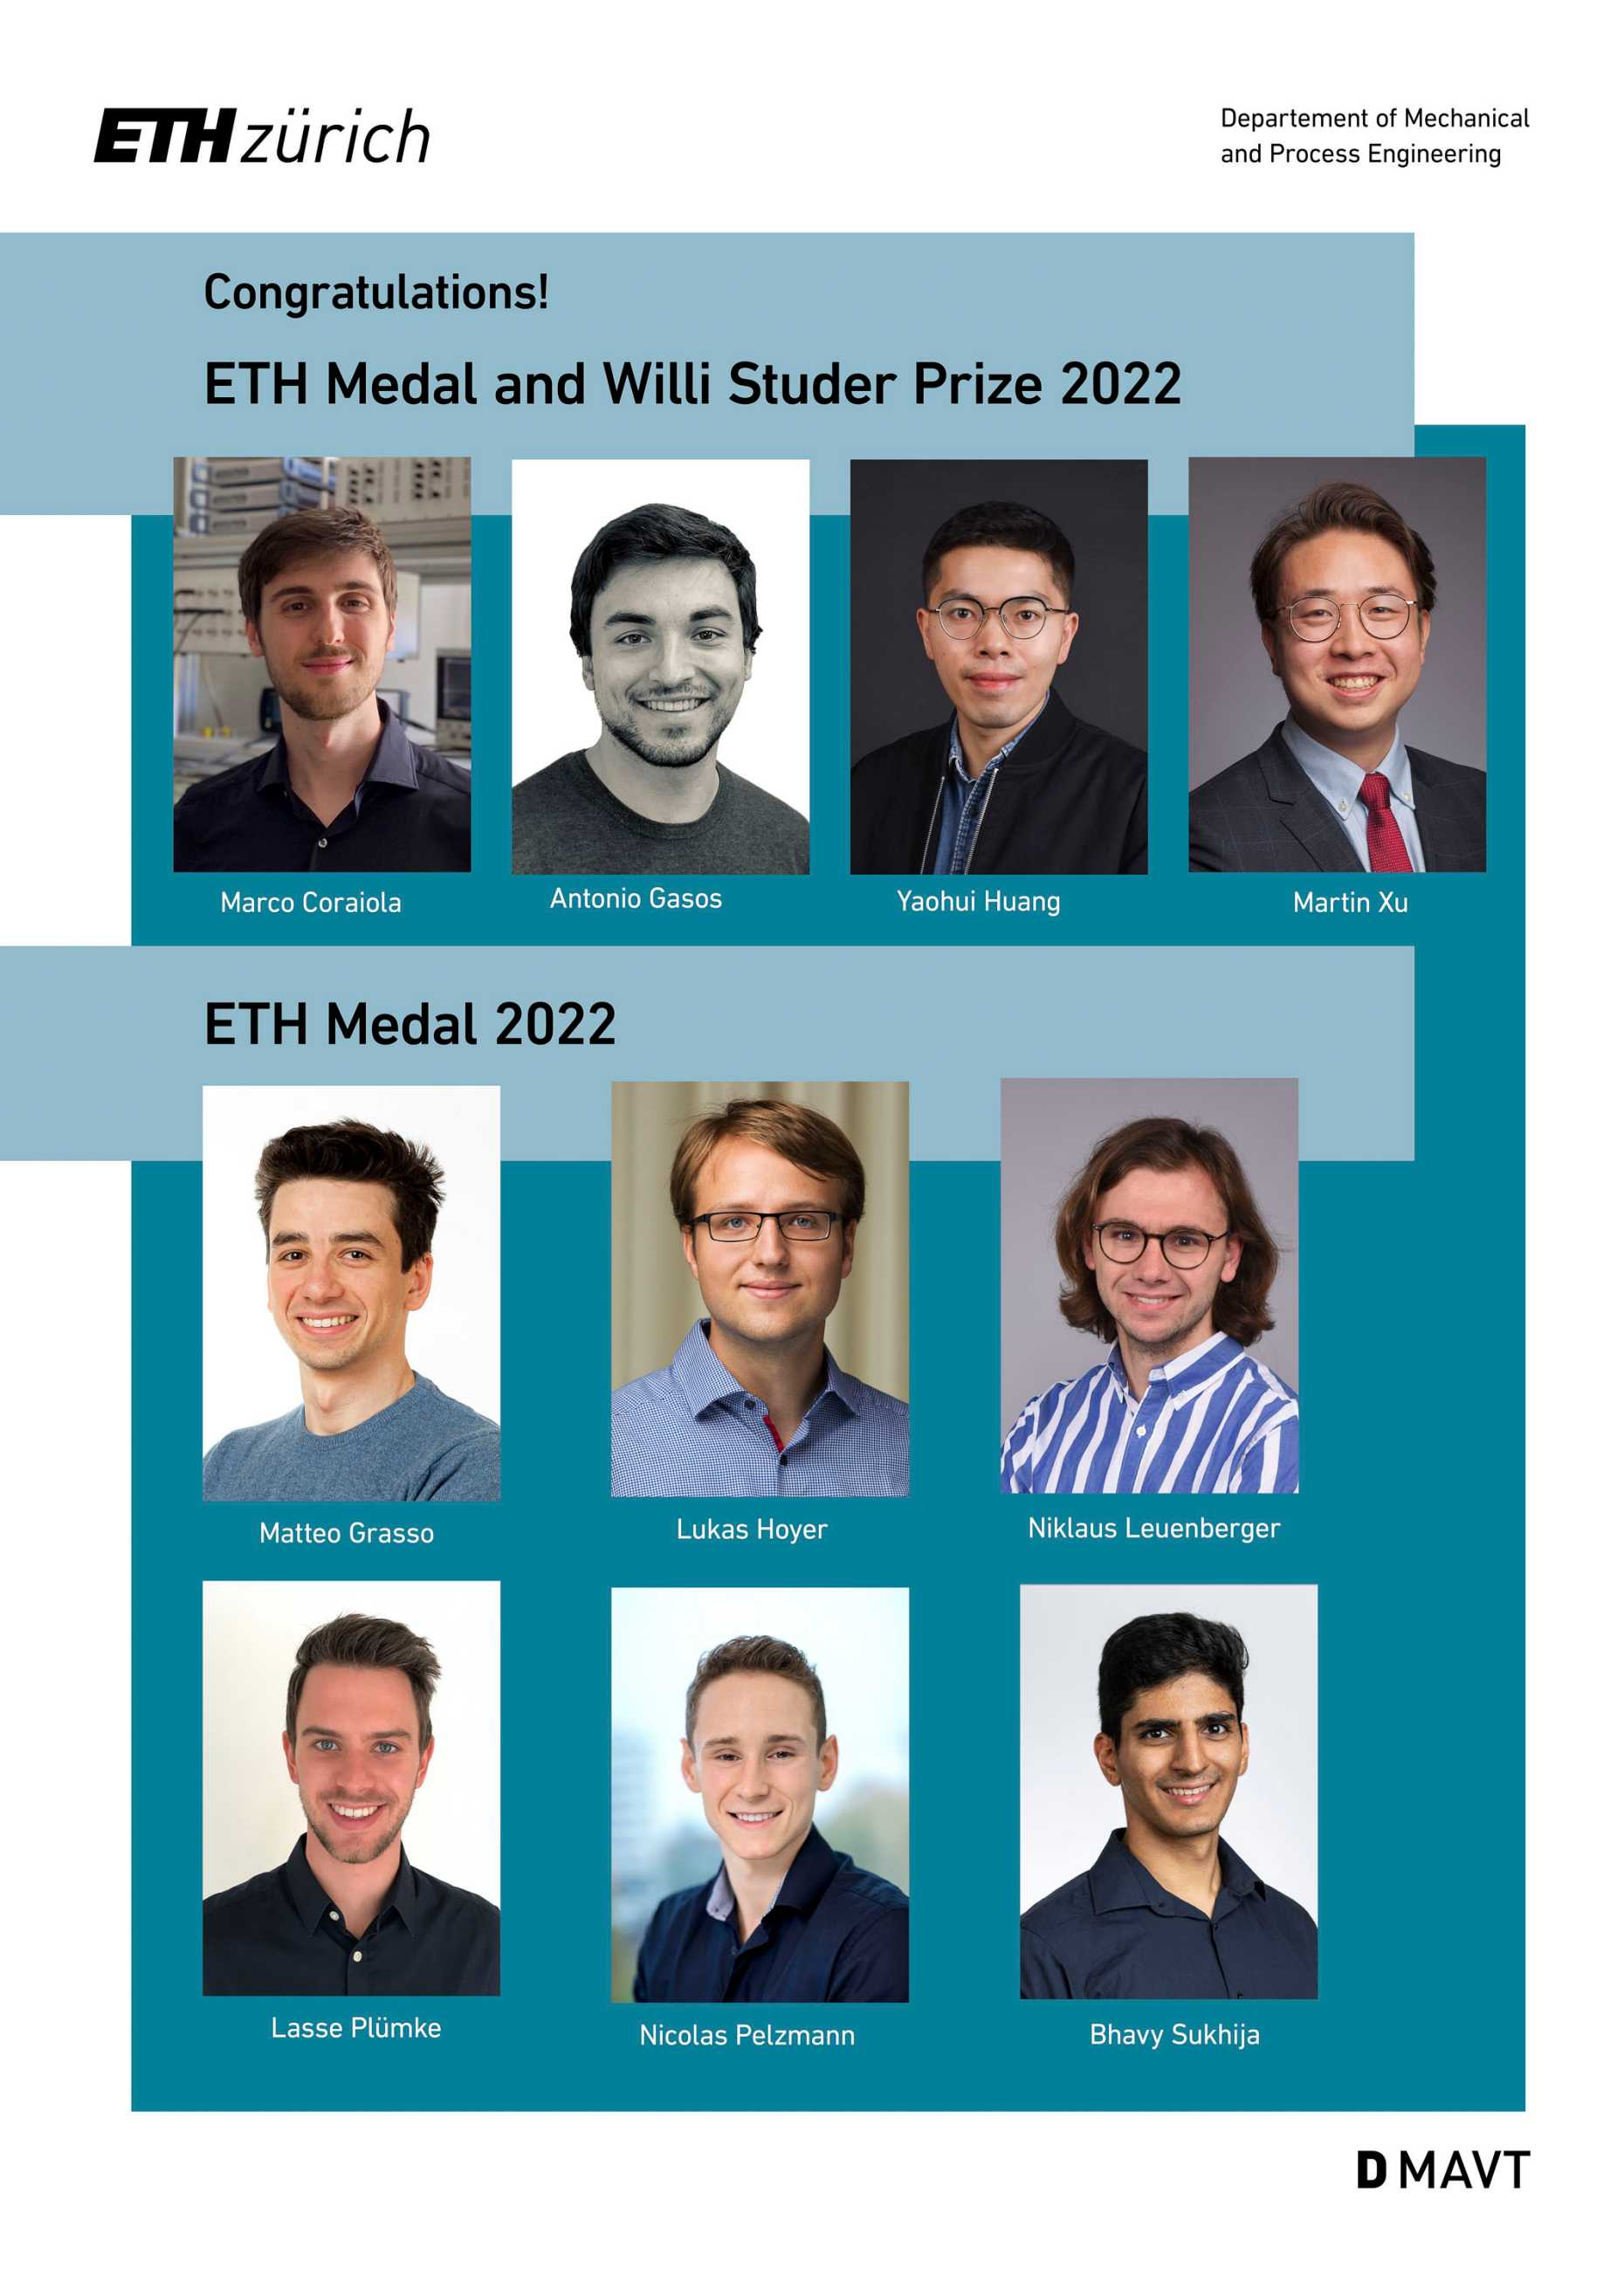 ETH Medal and Willi Studer Prize Recipients